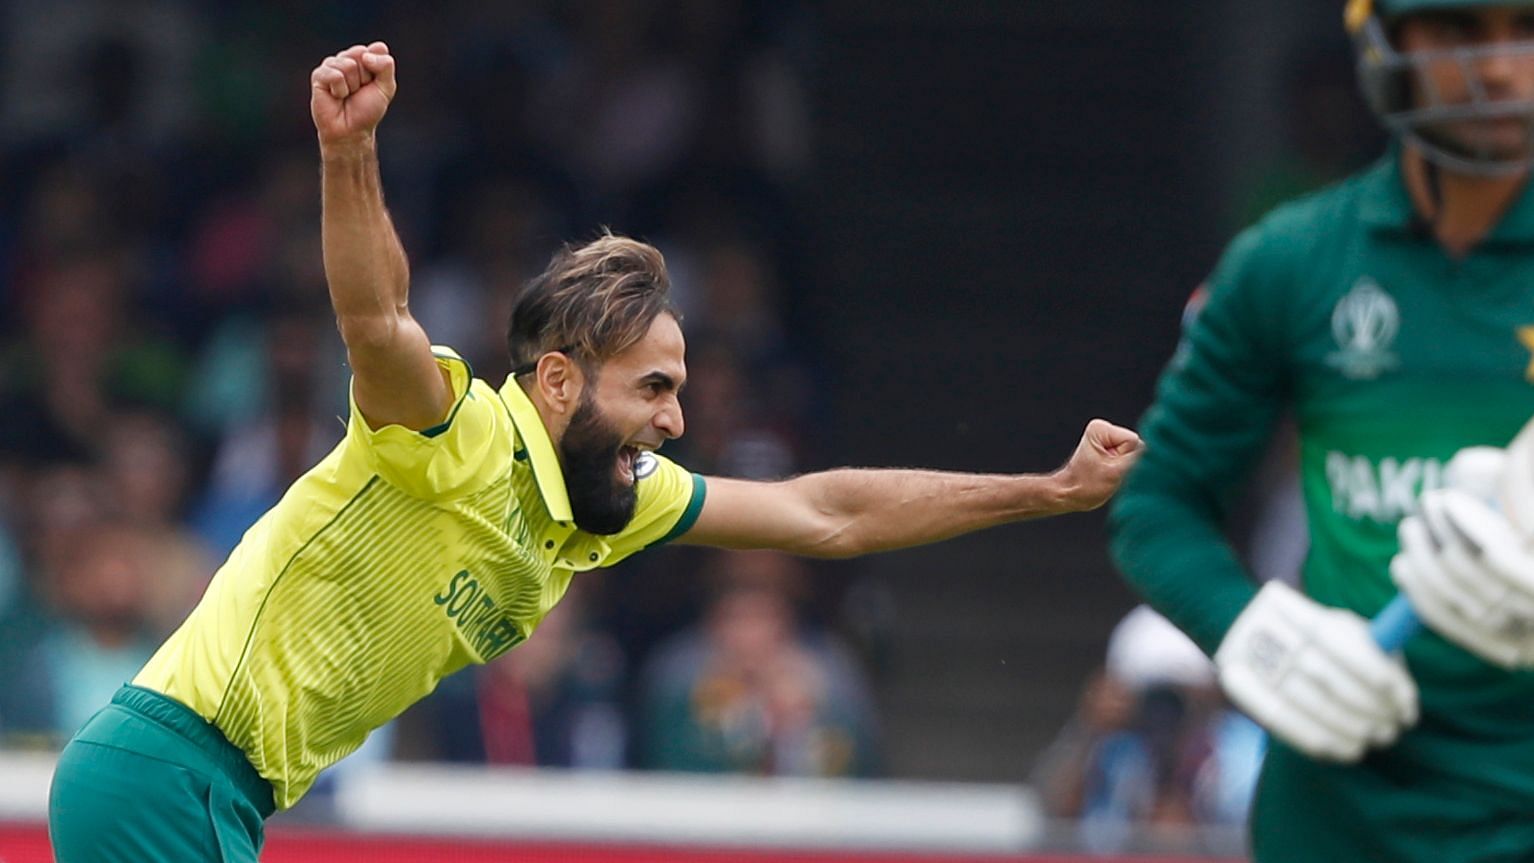 South Africa’s Imran Tahir celebrates after taking the wicket of Pakistan’s Fakhar Zaman caught at first slip during their Cricket World Cup match between Pakistan and South Africa at Lord’s cricket ground in London.